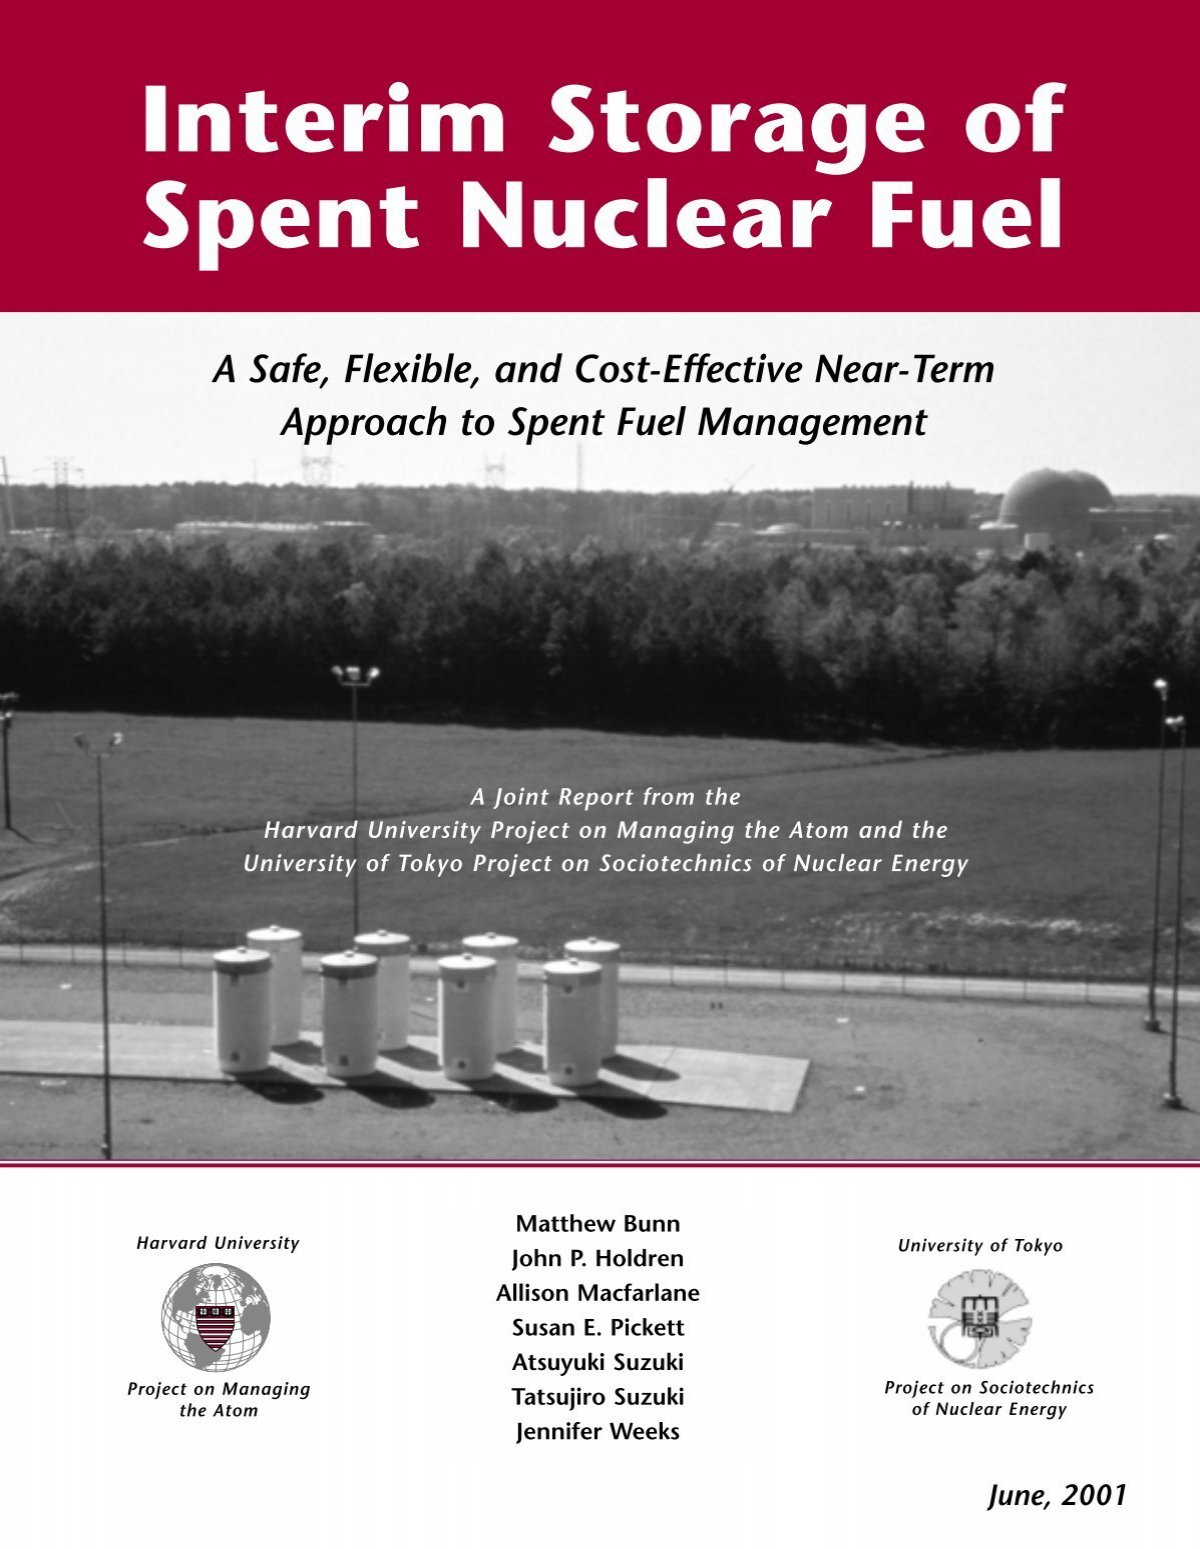 PDF) Using Contingent Valuation to Account for Negative Willingness to Pay  for the Construction of an Interim Storage Facility for Used Nuclear Fuel  in the United States